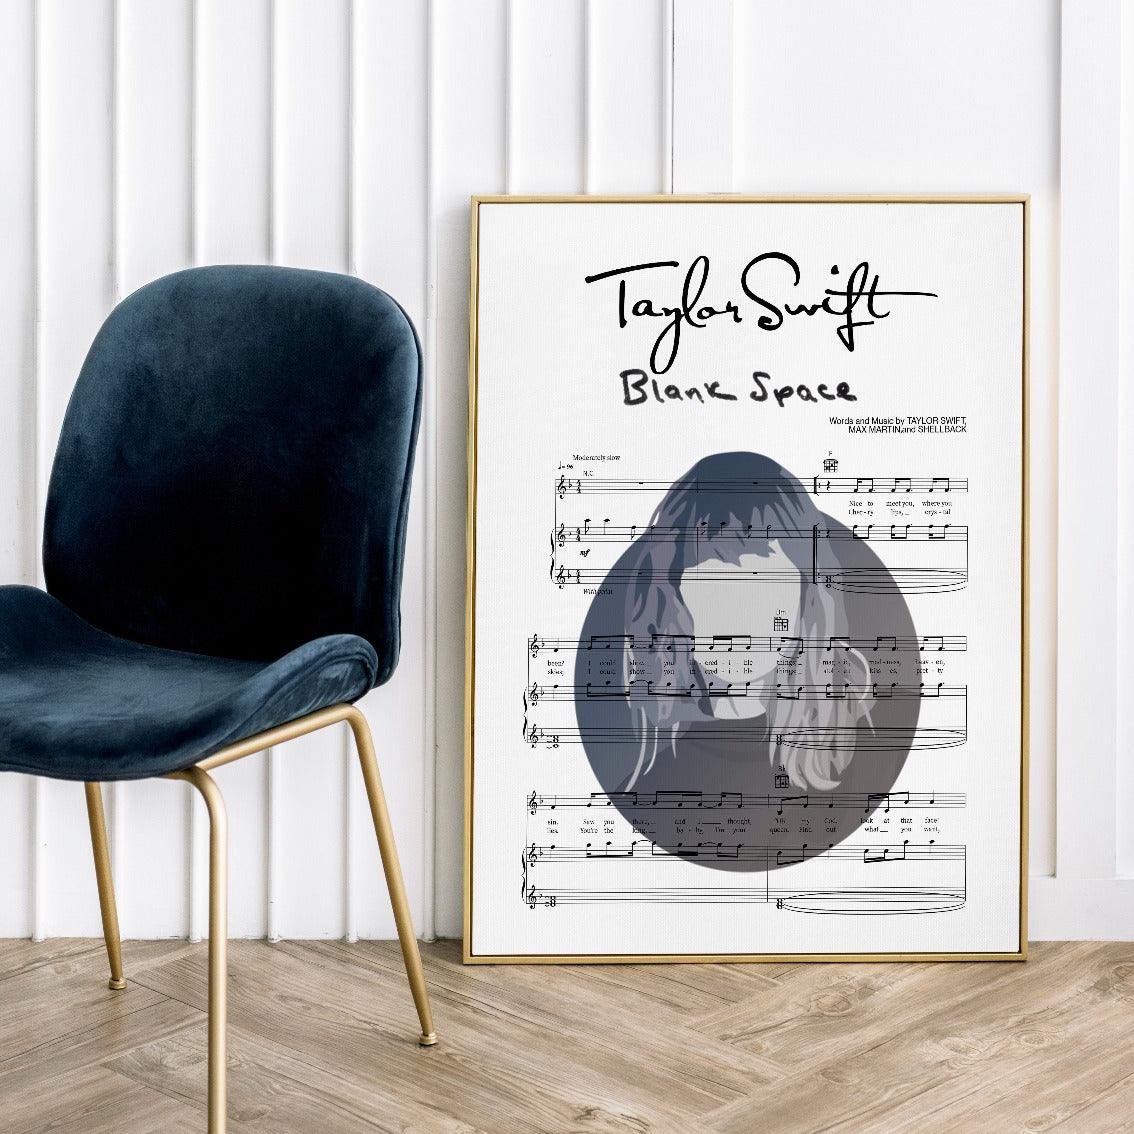 Print lyrical with these unusual and Natural High quality black and white musical scores with brightly coloured illustrations and quirky art print by artist Taylor Swift to put on the wall of the room at home. A4 Posters uk By 98types art online.